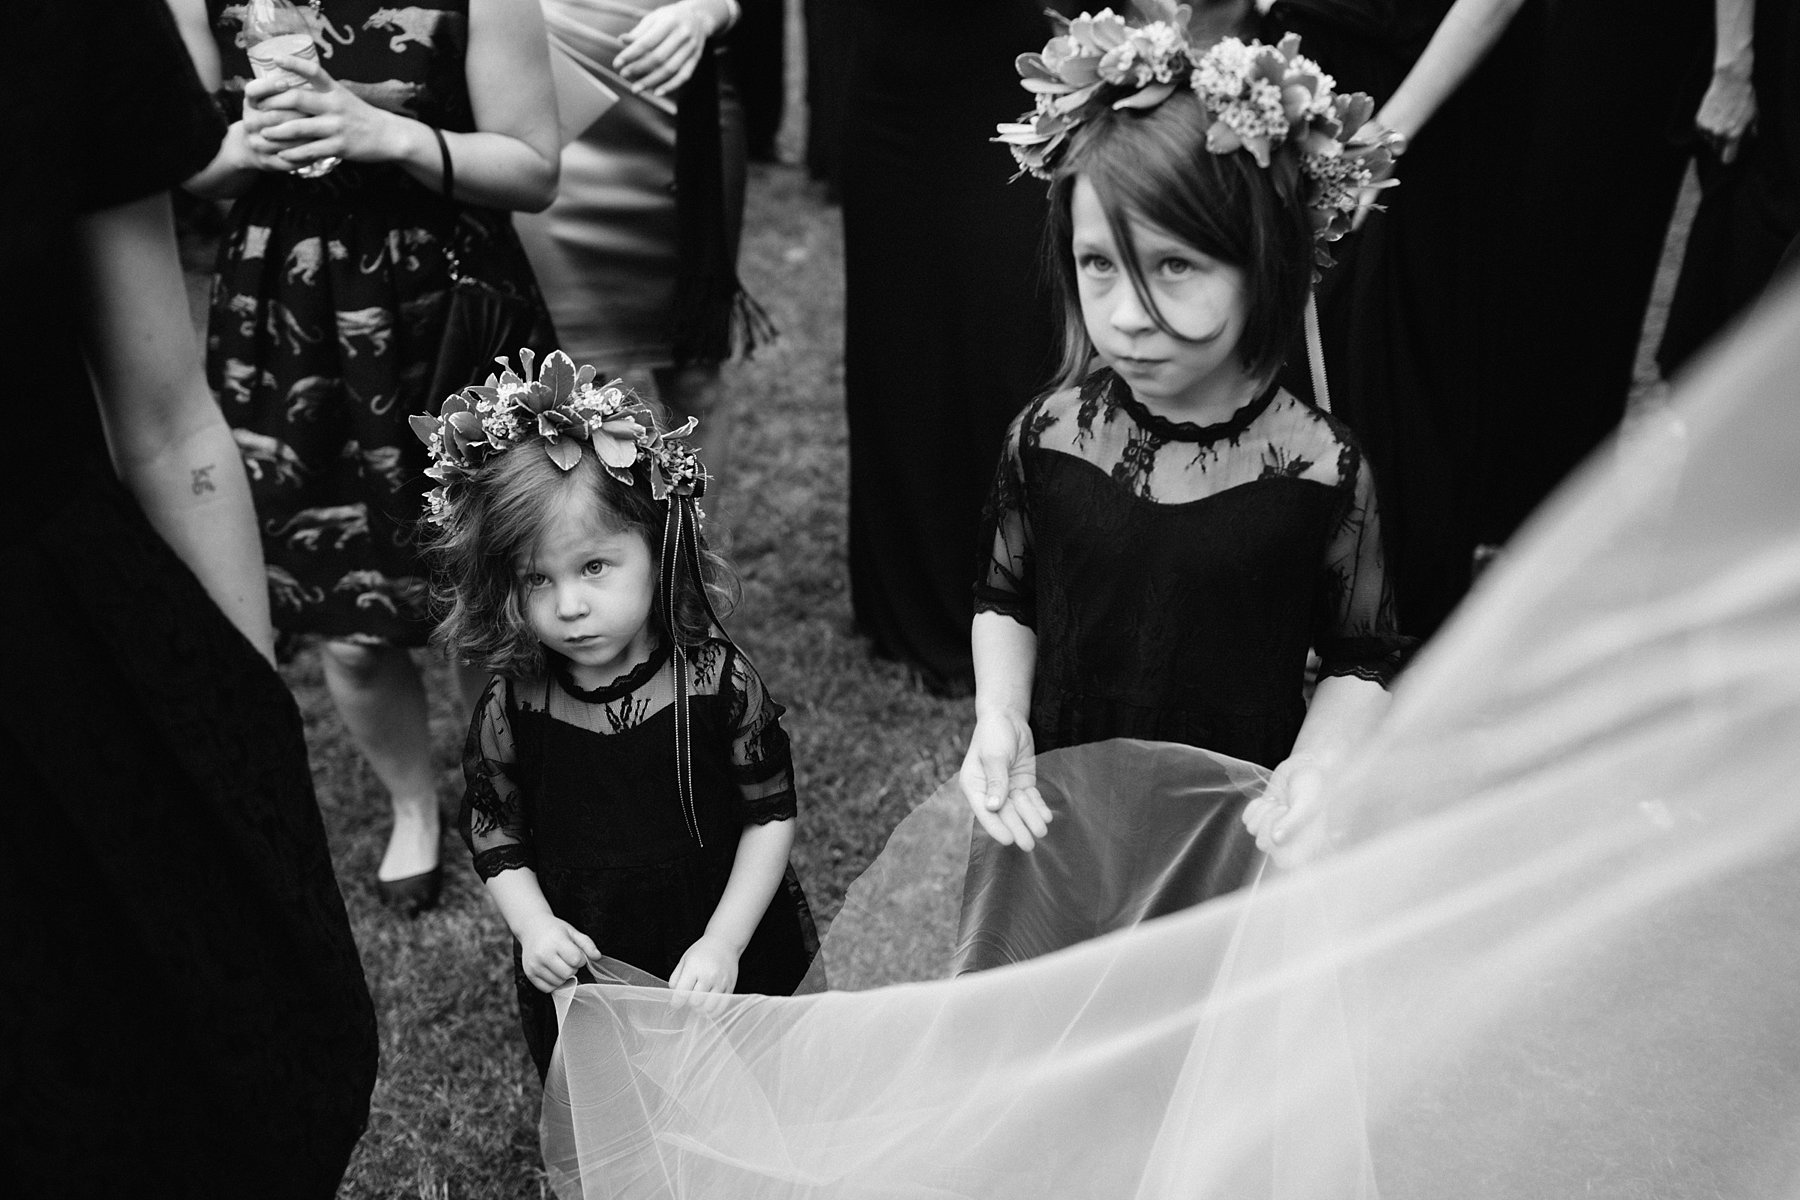 Flower girls at a wedding by Georgia photographer Catalina Jean